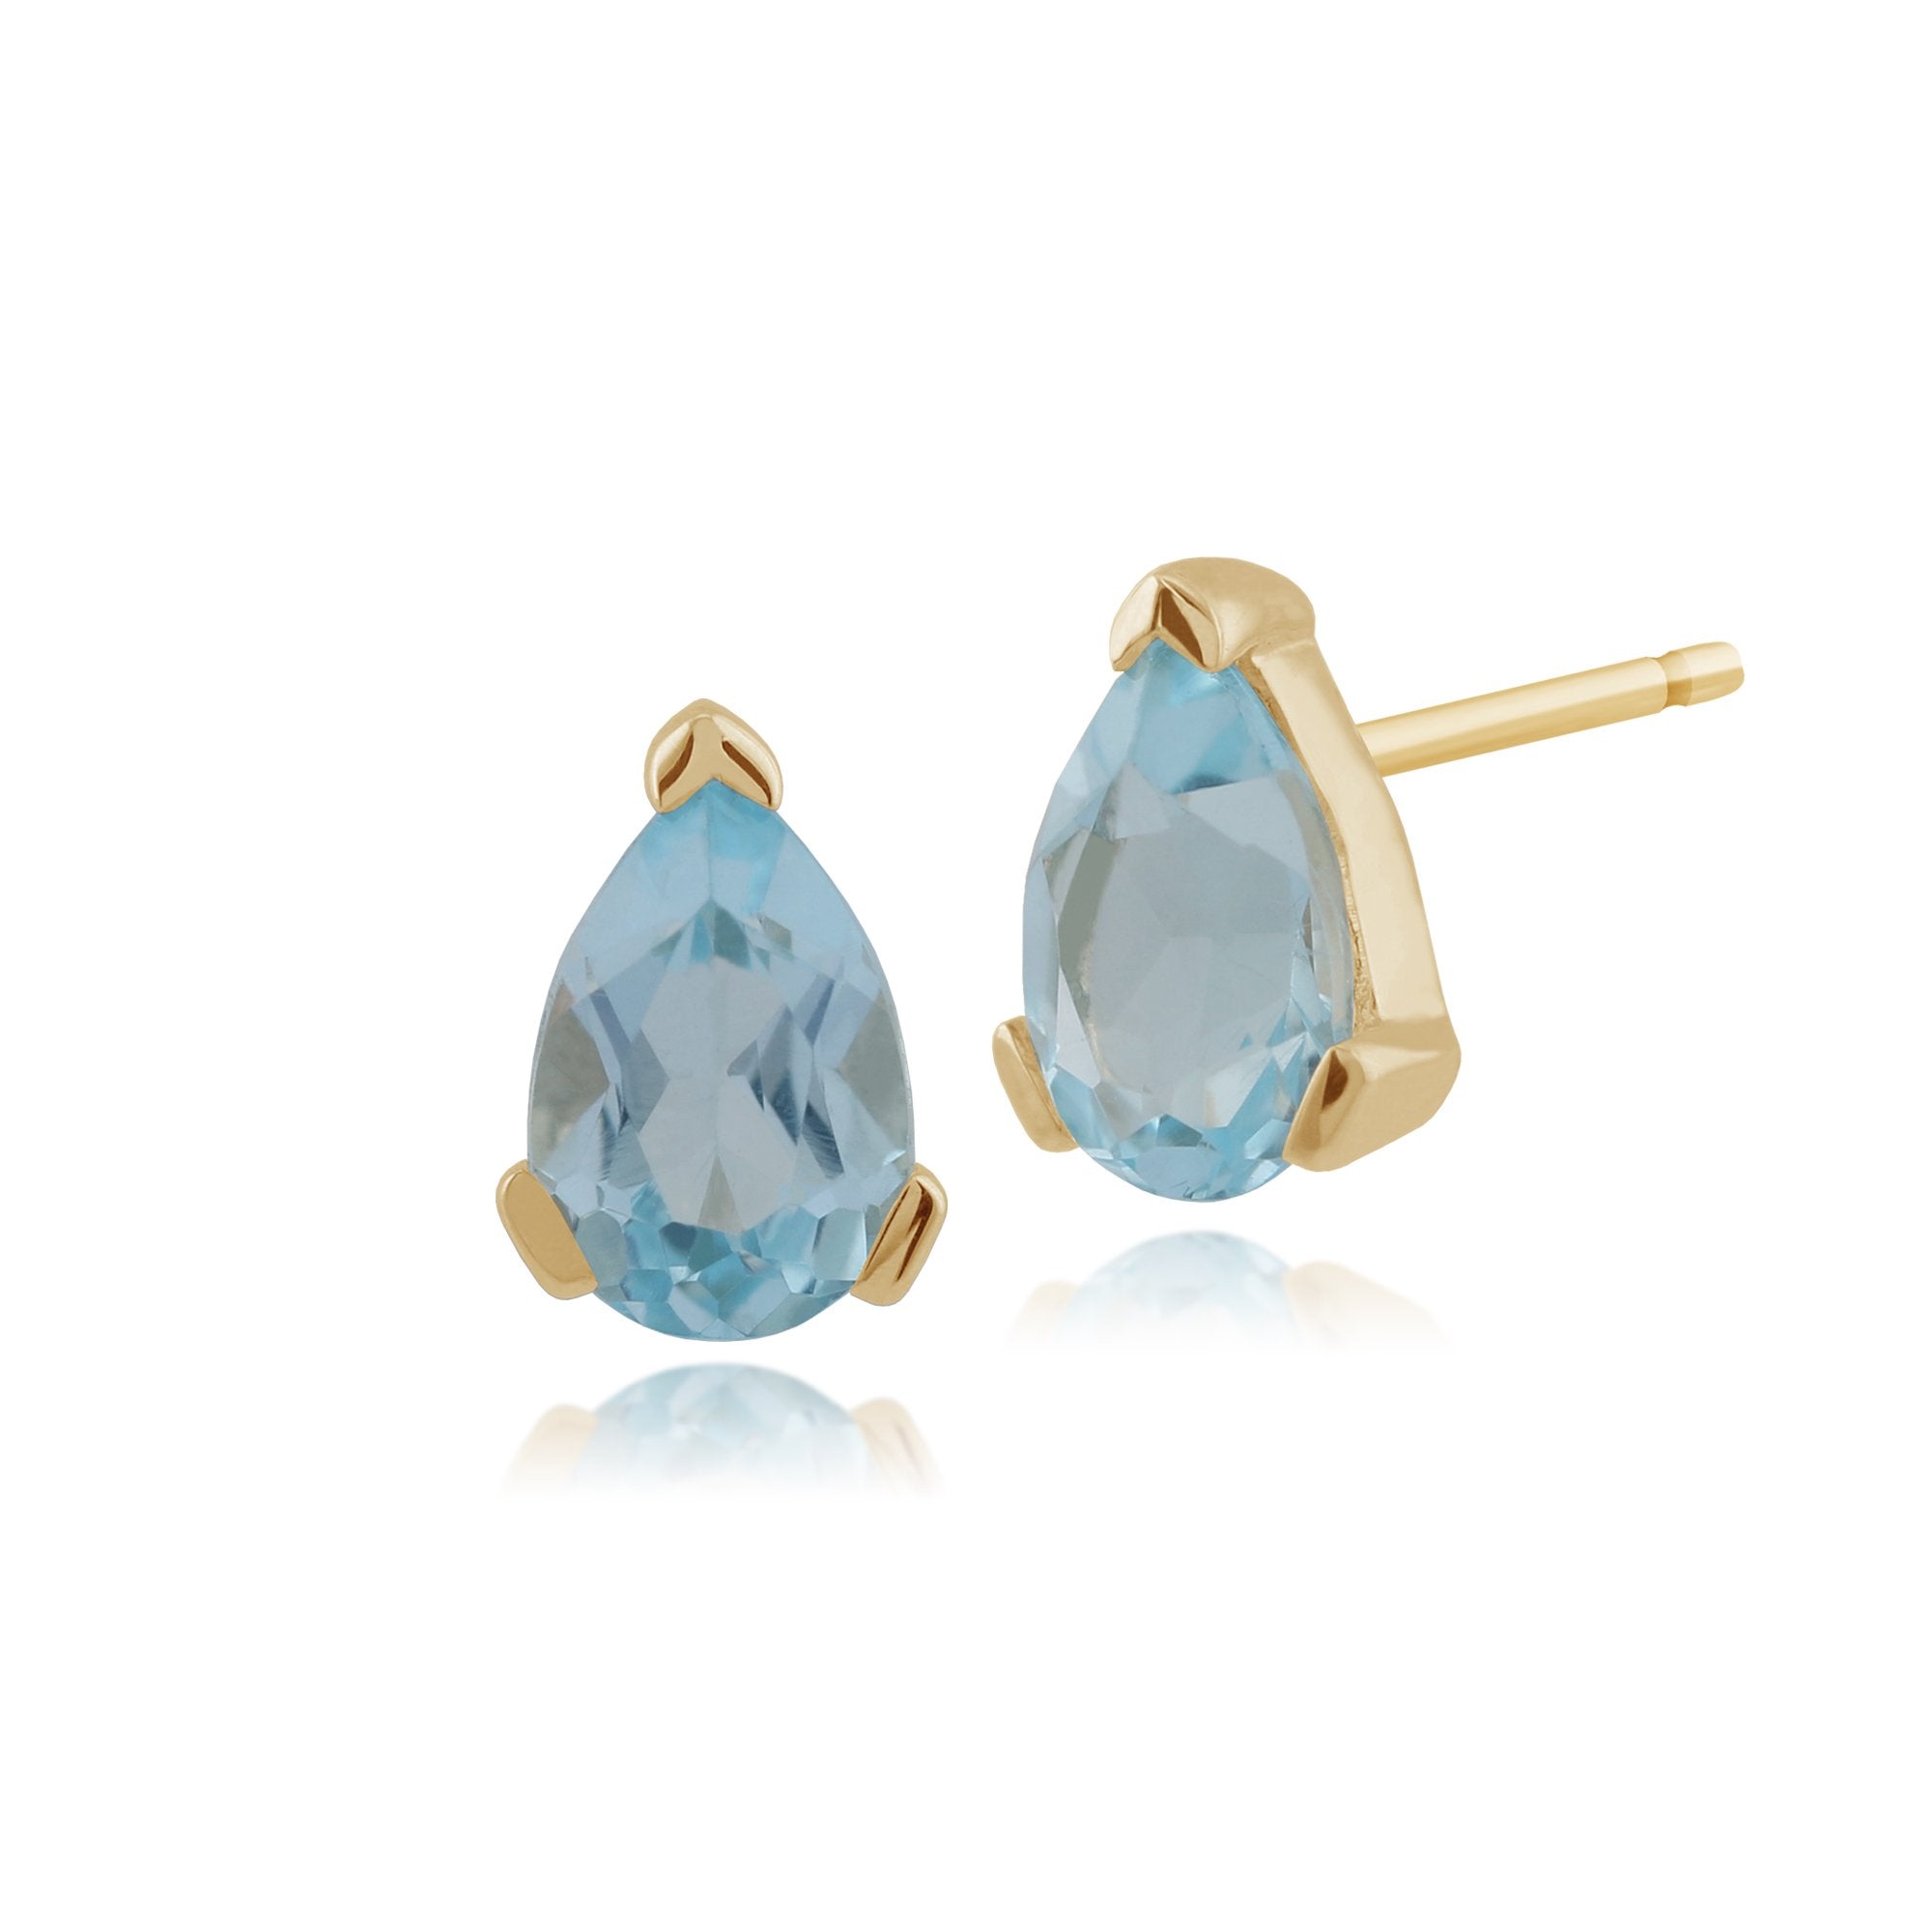 Classic Pear Blue Topaz Stud Earrings in 9ct Yellow Gold 6.5x4mm